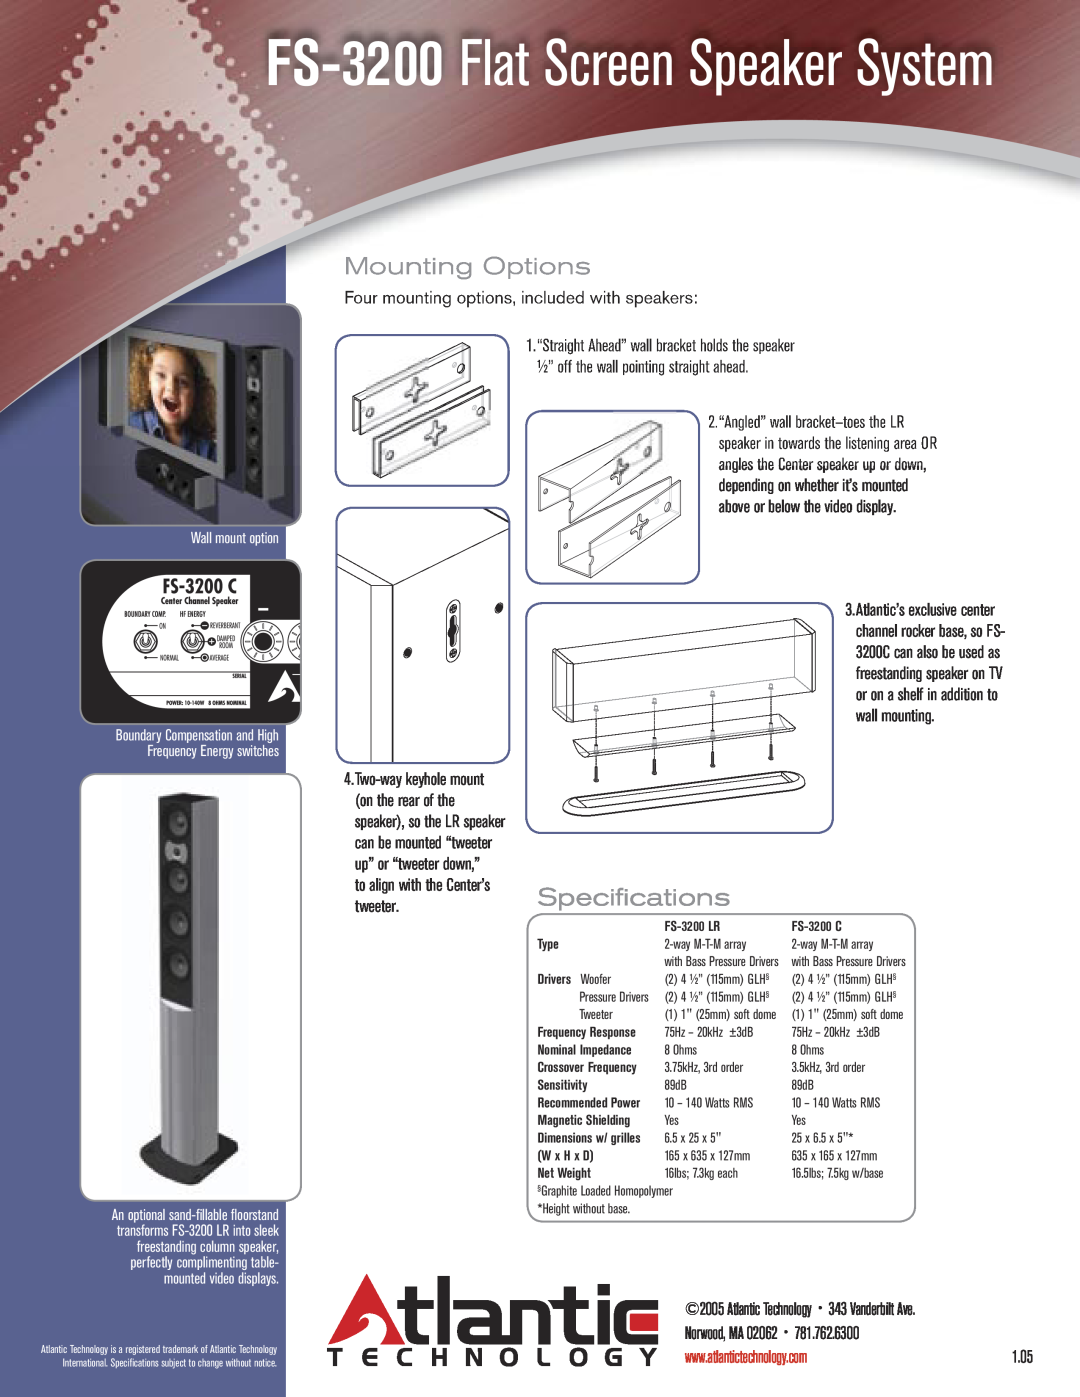 Atlantic Technology FS-3200 Flat Screen Speaker System, Mounting Options, Speciﬁ cations, Frequency Energy switches 